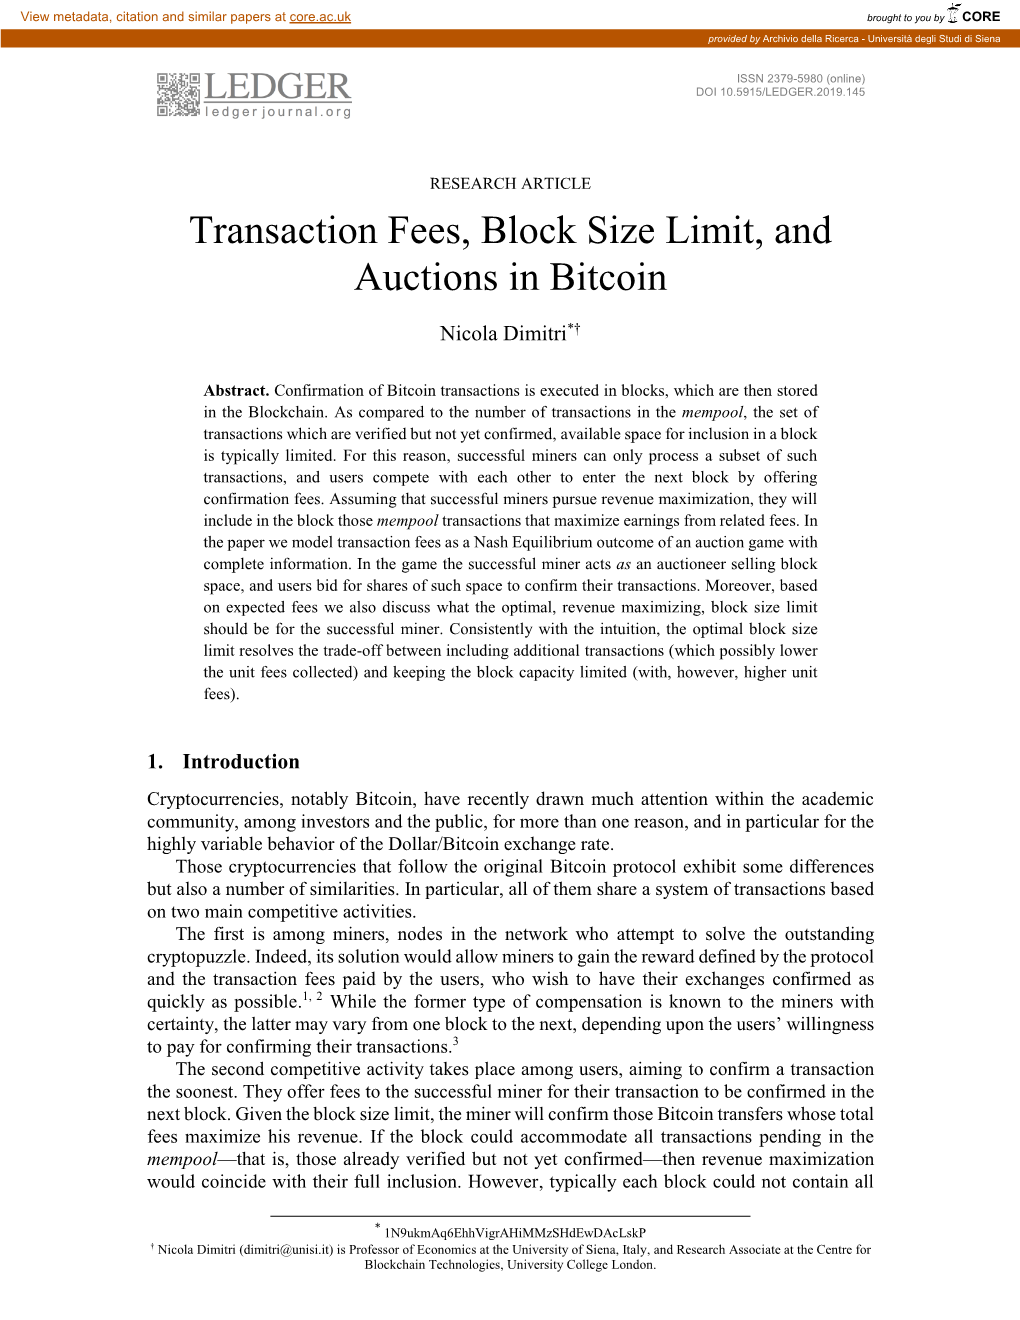 Transaction Fees, Block Size Limit, and Auctions in Bitcoin